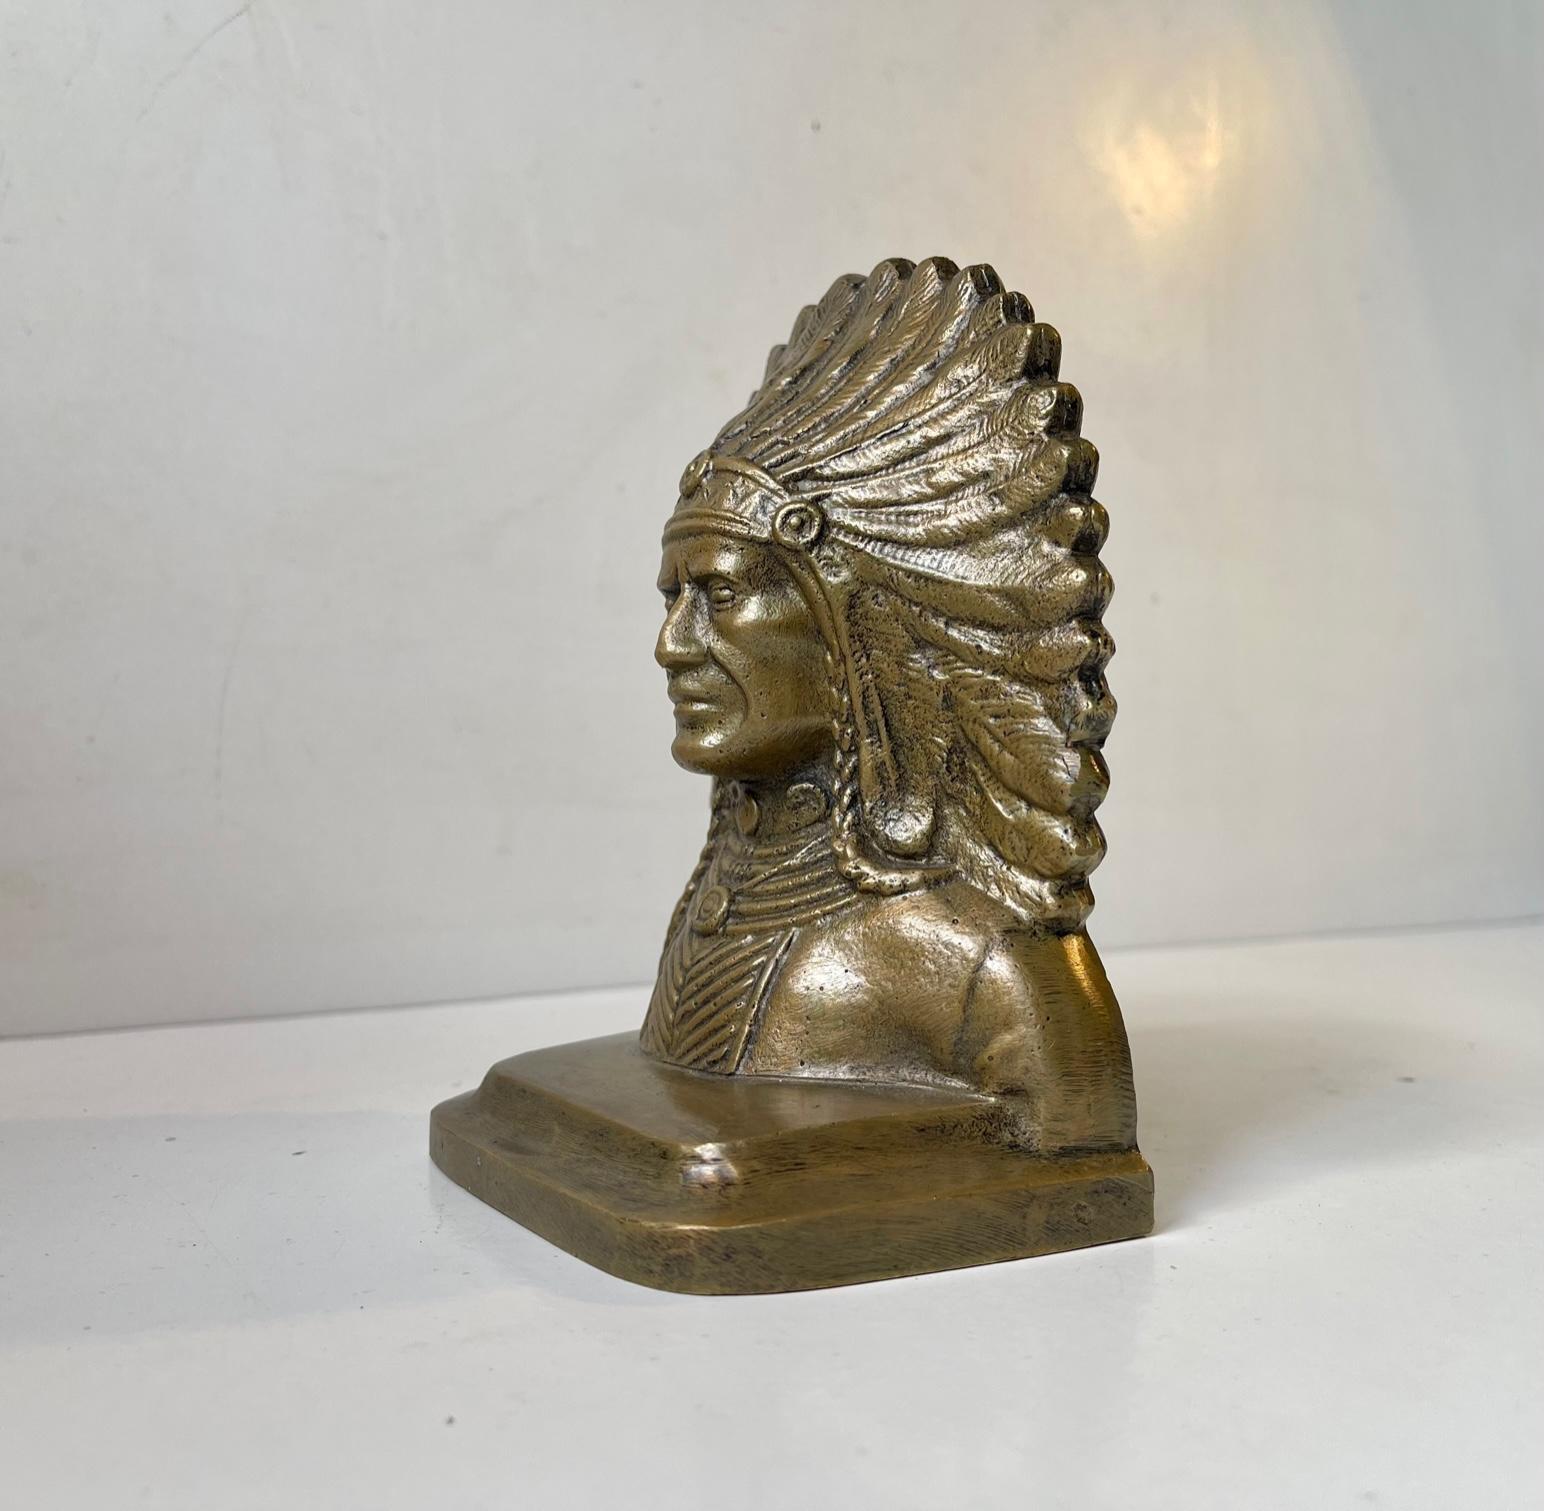 Ornate cast bronze bookend depicting Indian Chief in full headdress. It was made in the US or continental Europe circa 1930-60. Measurements: H: 14.5 cm, W: 12 cm, Dept: 8 cm.